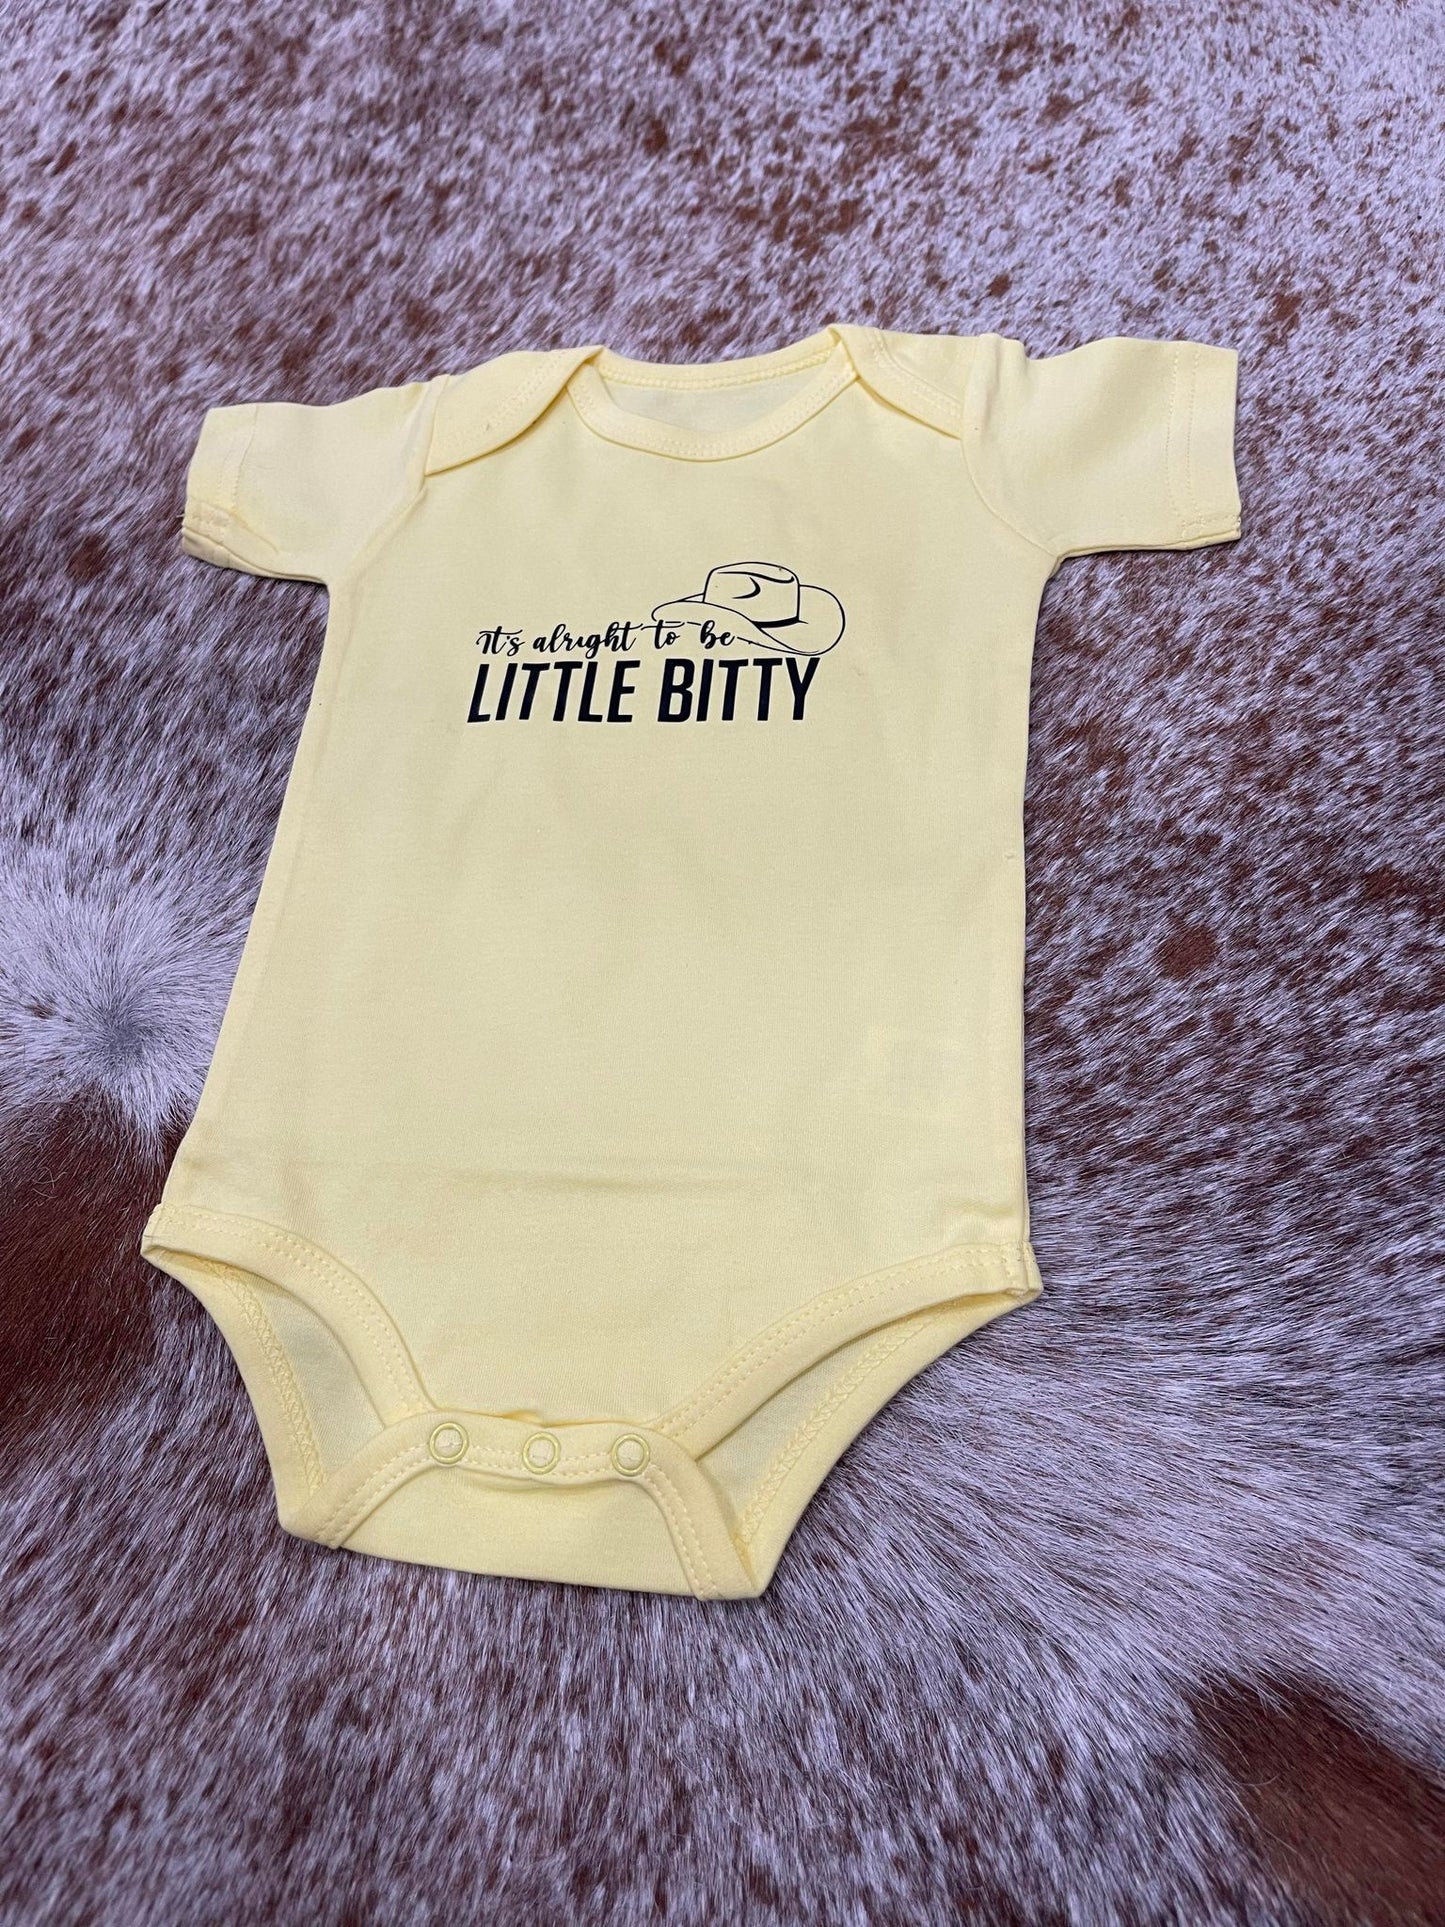 Baby Onesie - Its alright to be little bitty